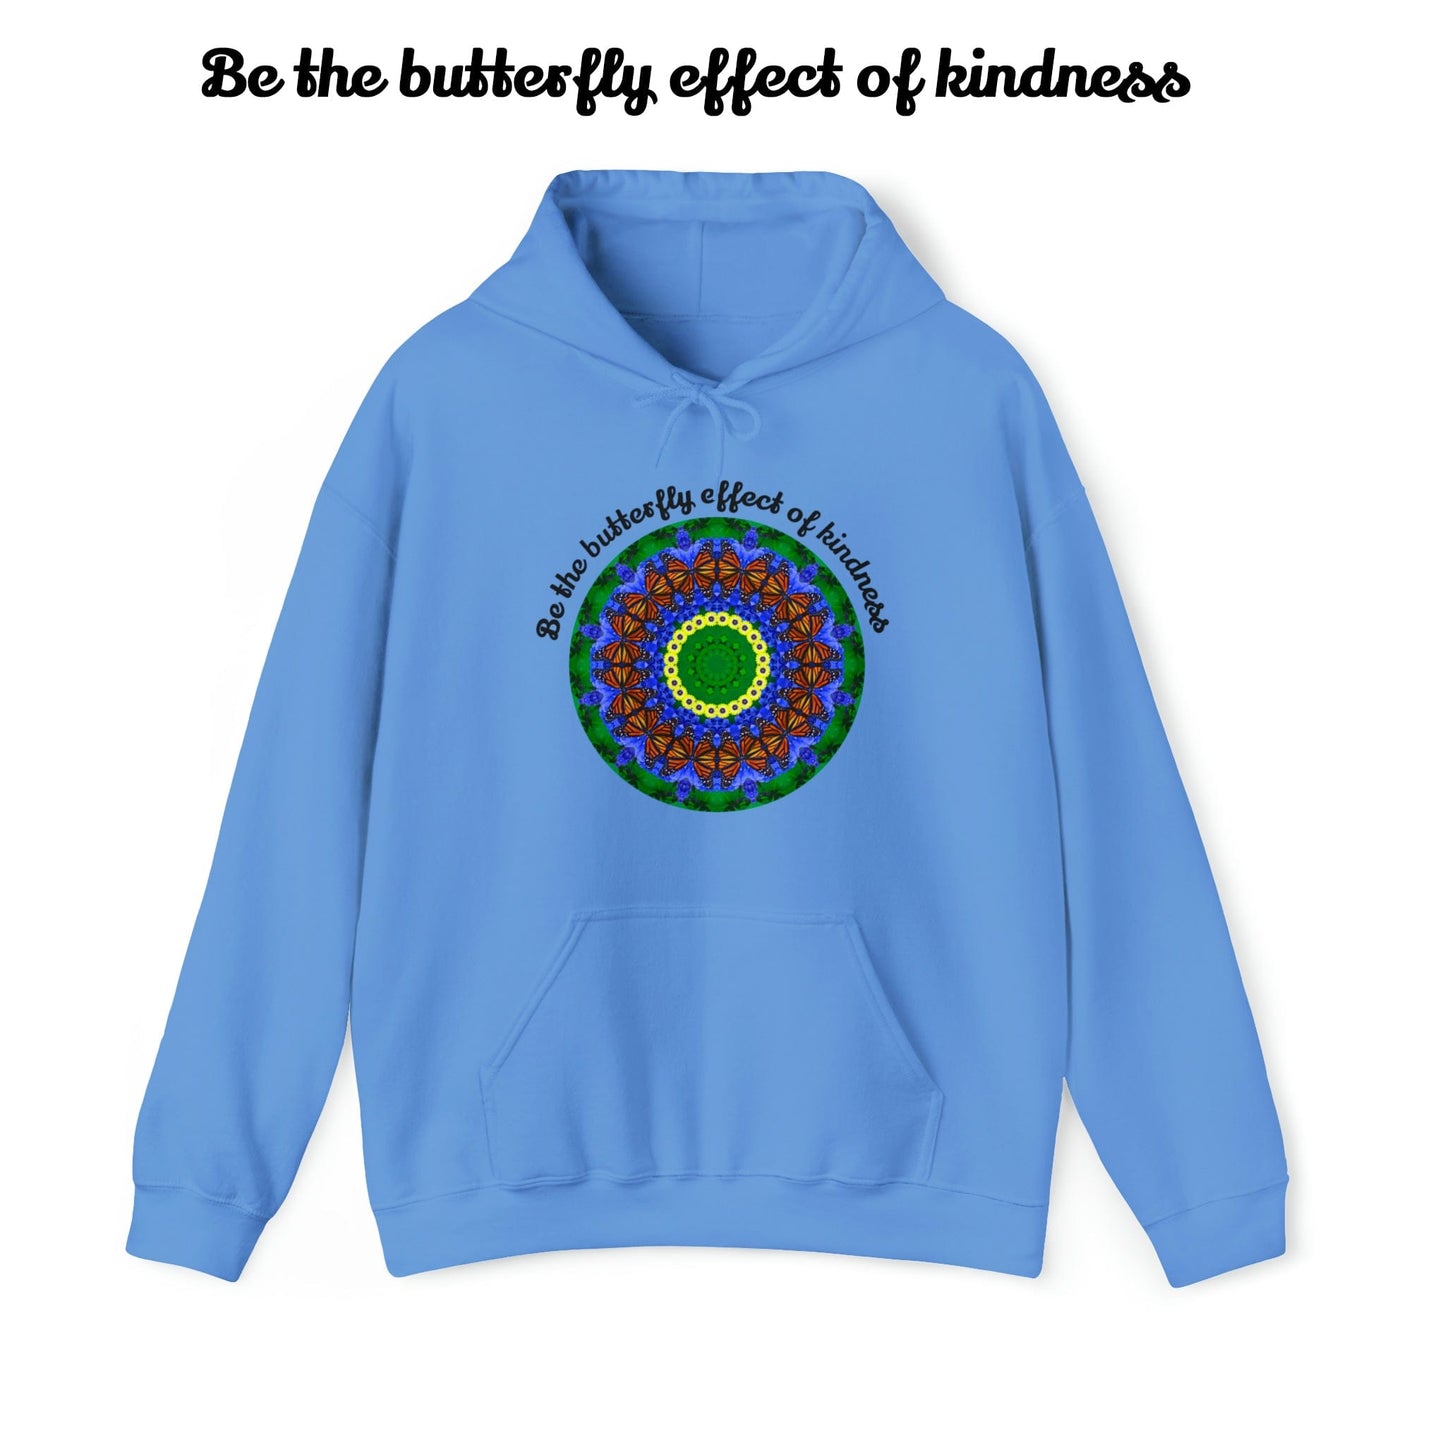 Monarch Butterfly Graphic Love Sweatshirt Hoodie, Mandala, Be The Butterfly Effect Of Kindness